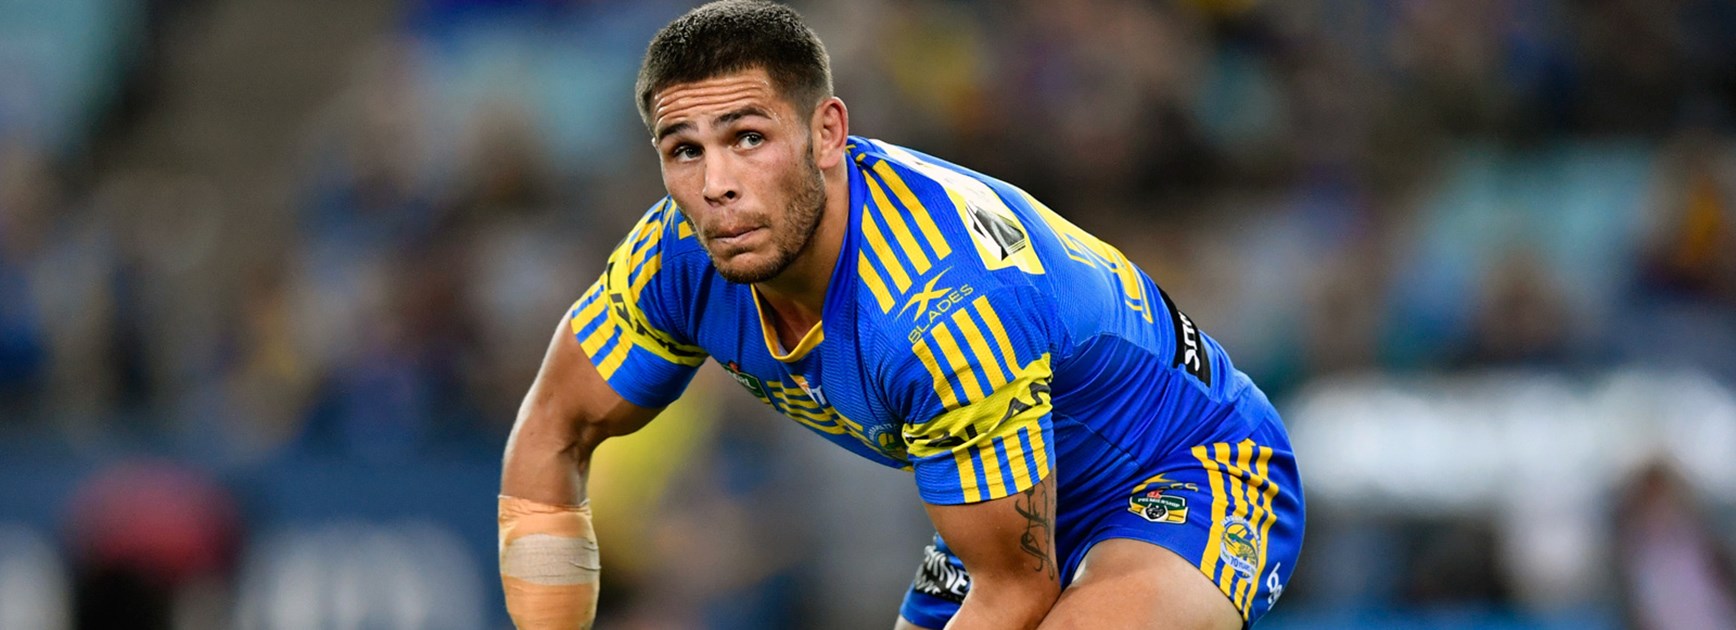 Eels utility ready to grab chance at hooker